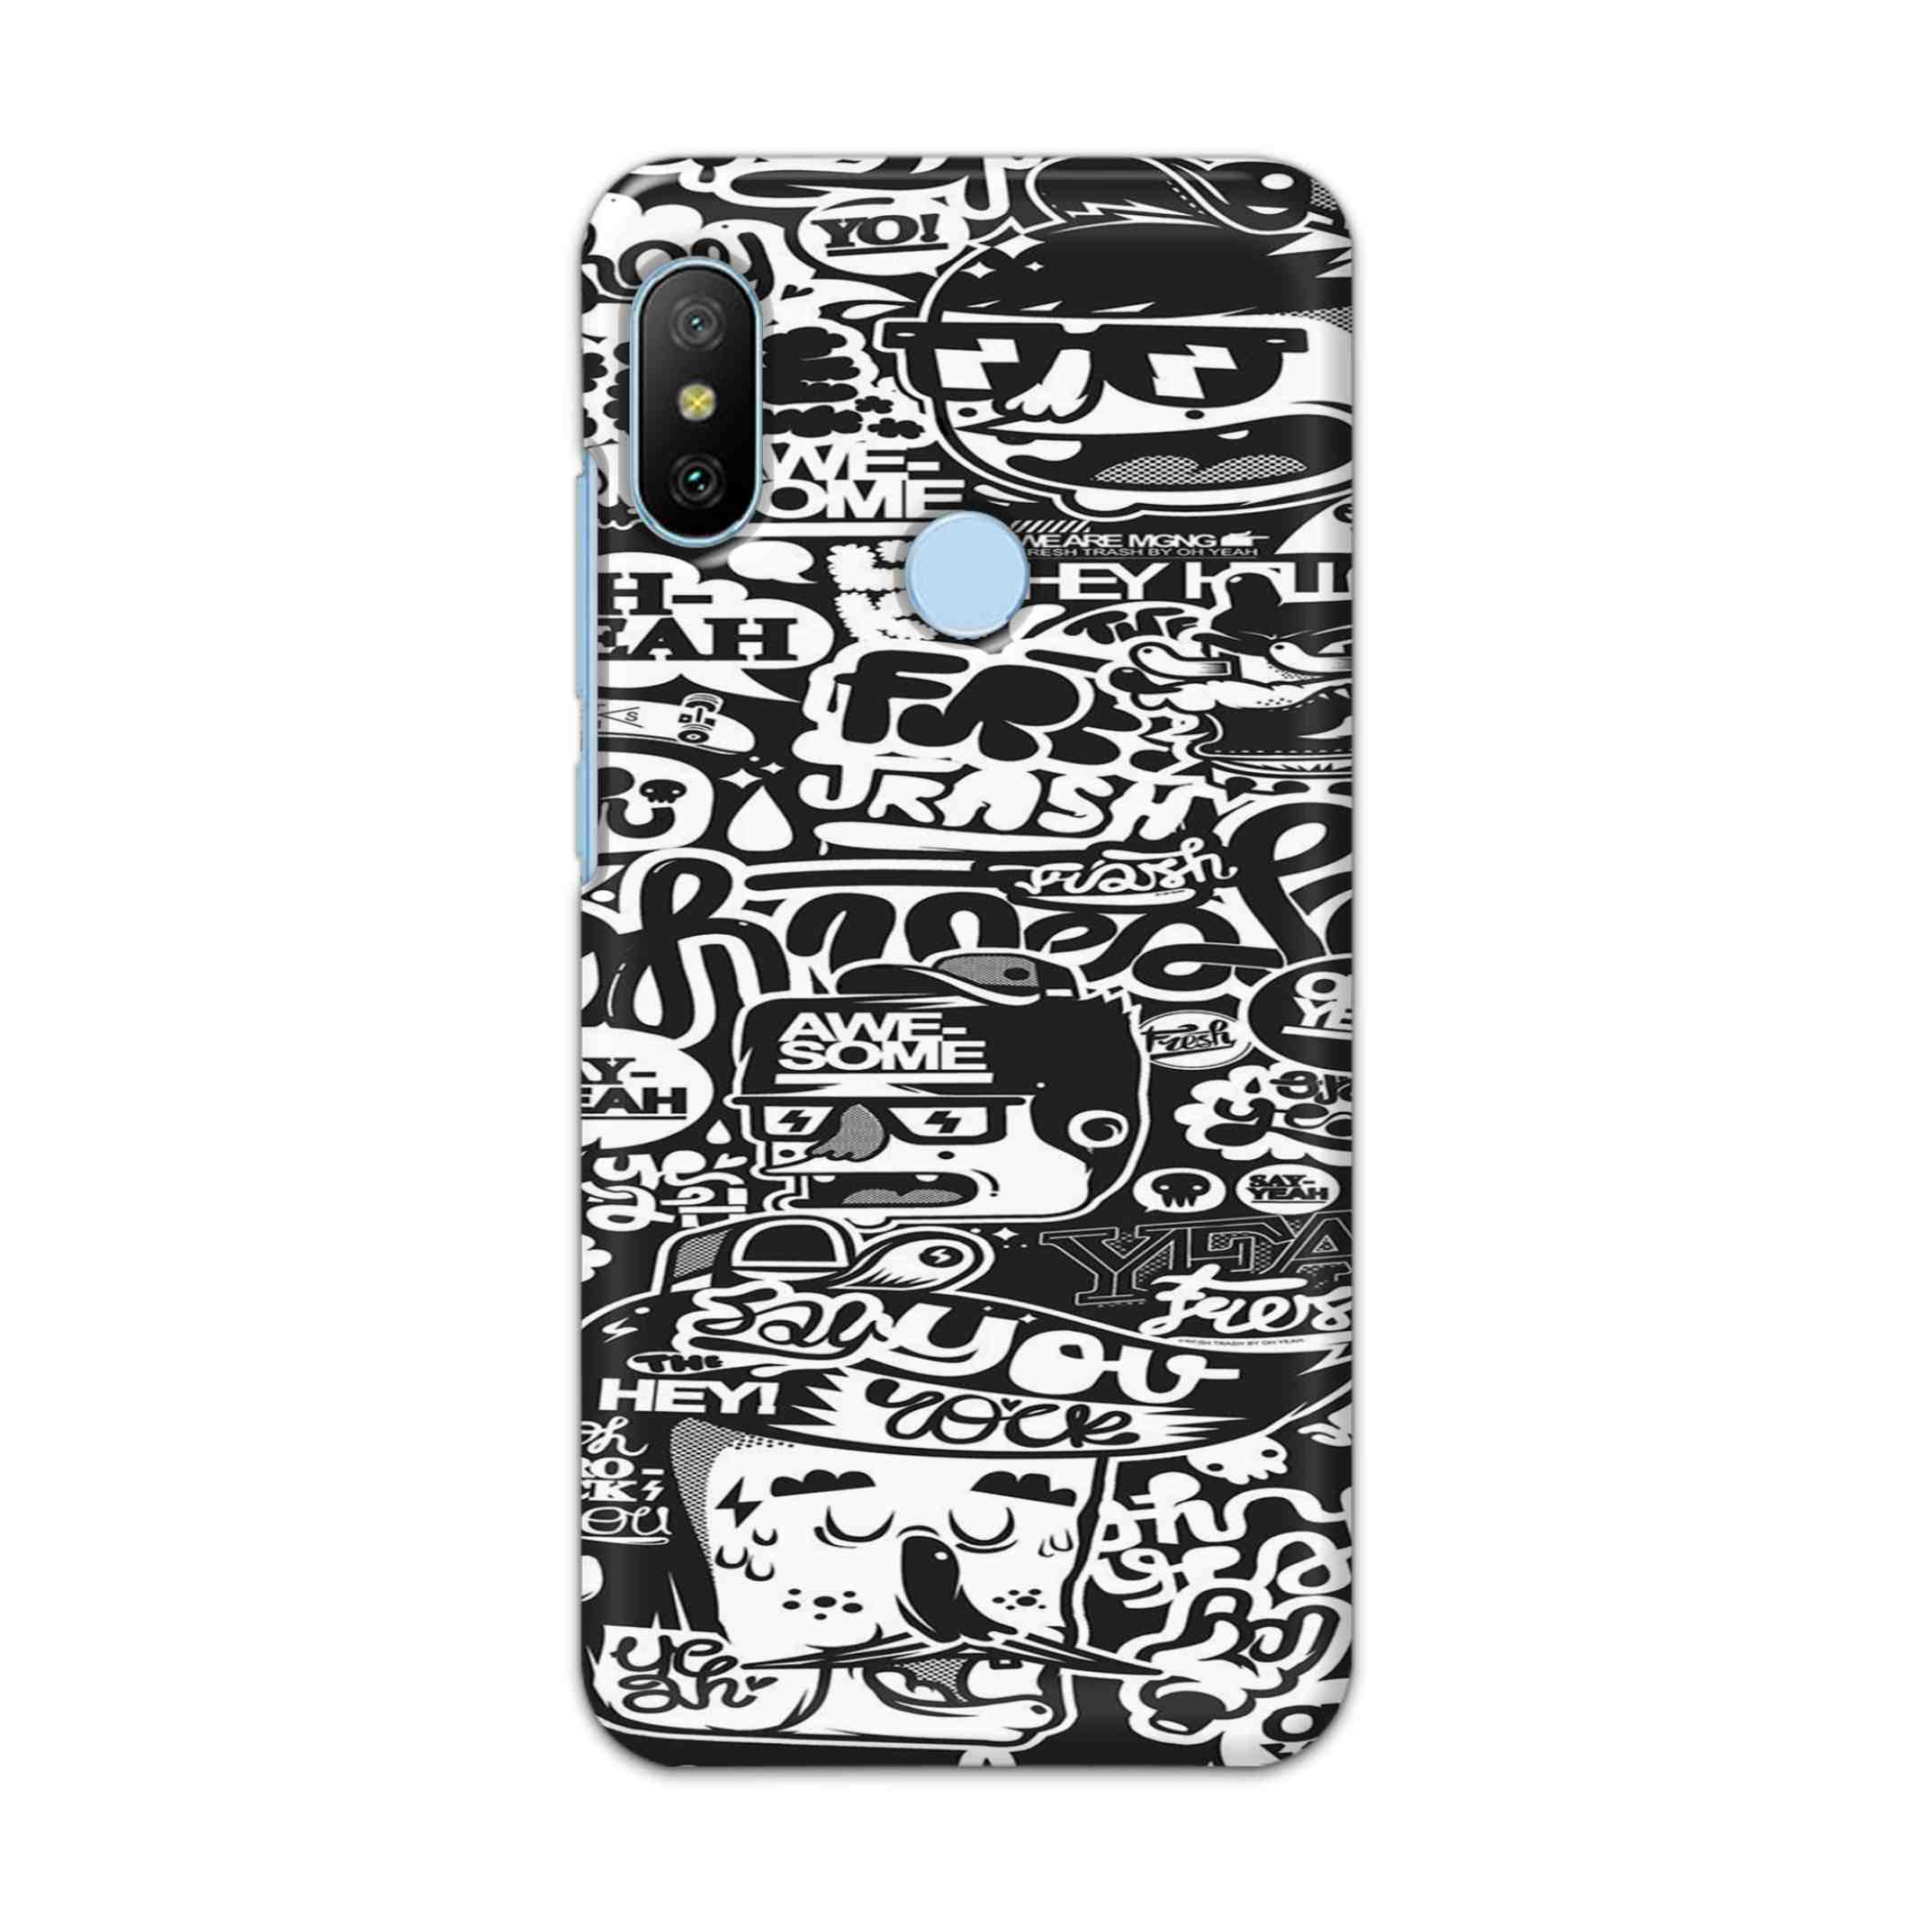 Buy Awesome Hard Back Mobile Phone Case/Cover For Xiaomi Redmi 6 Pro Online